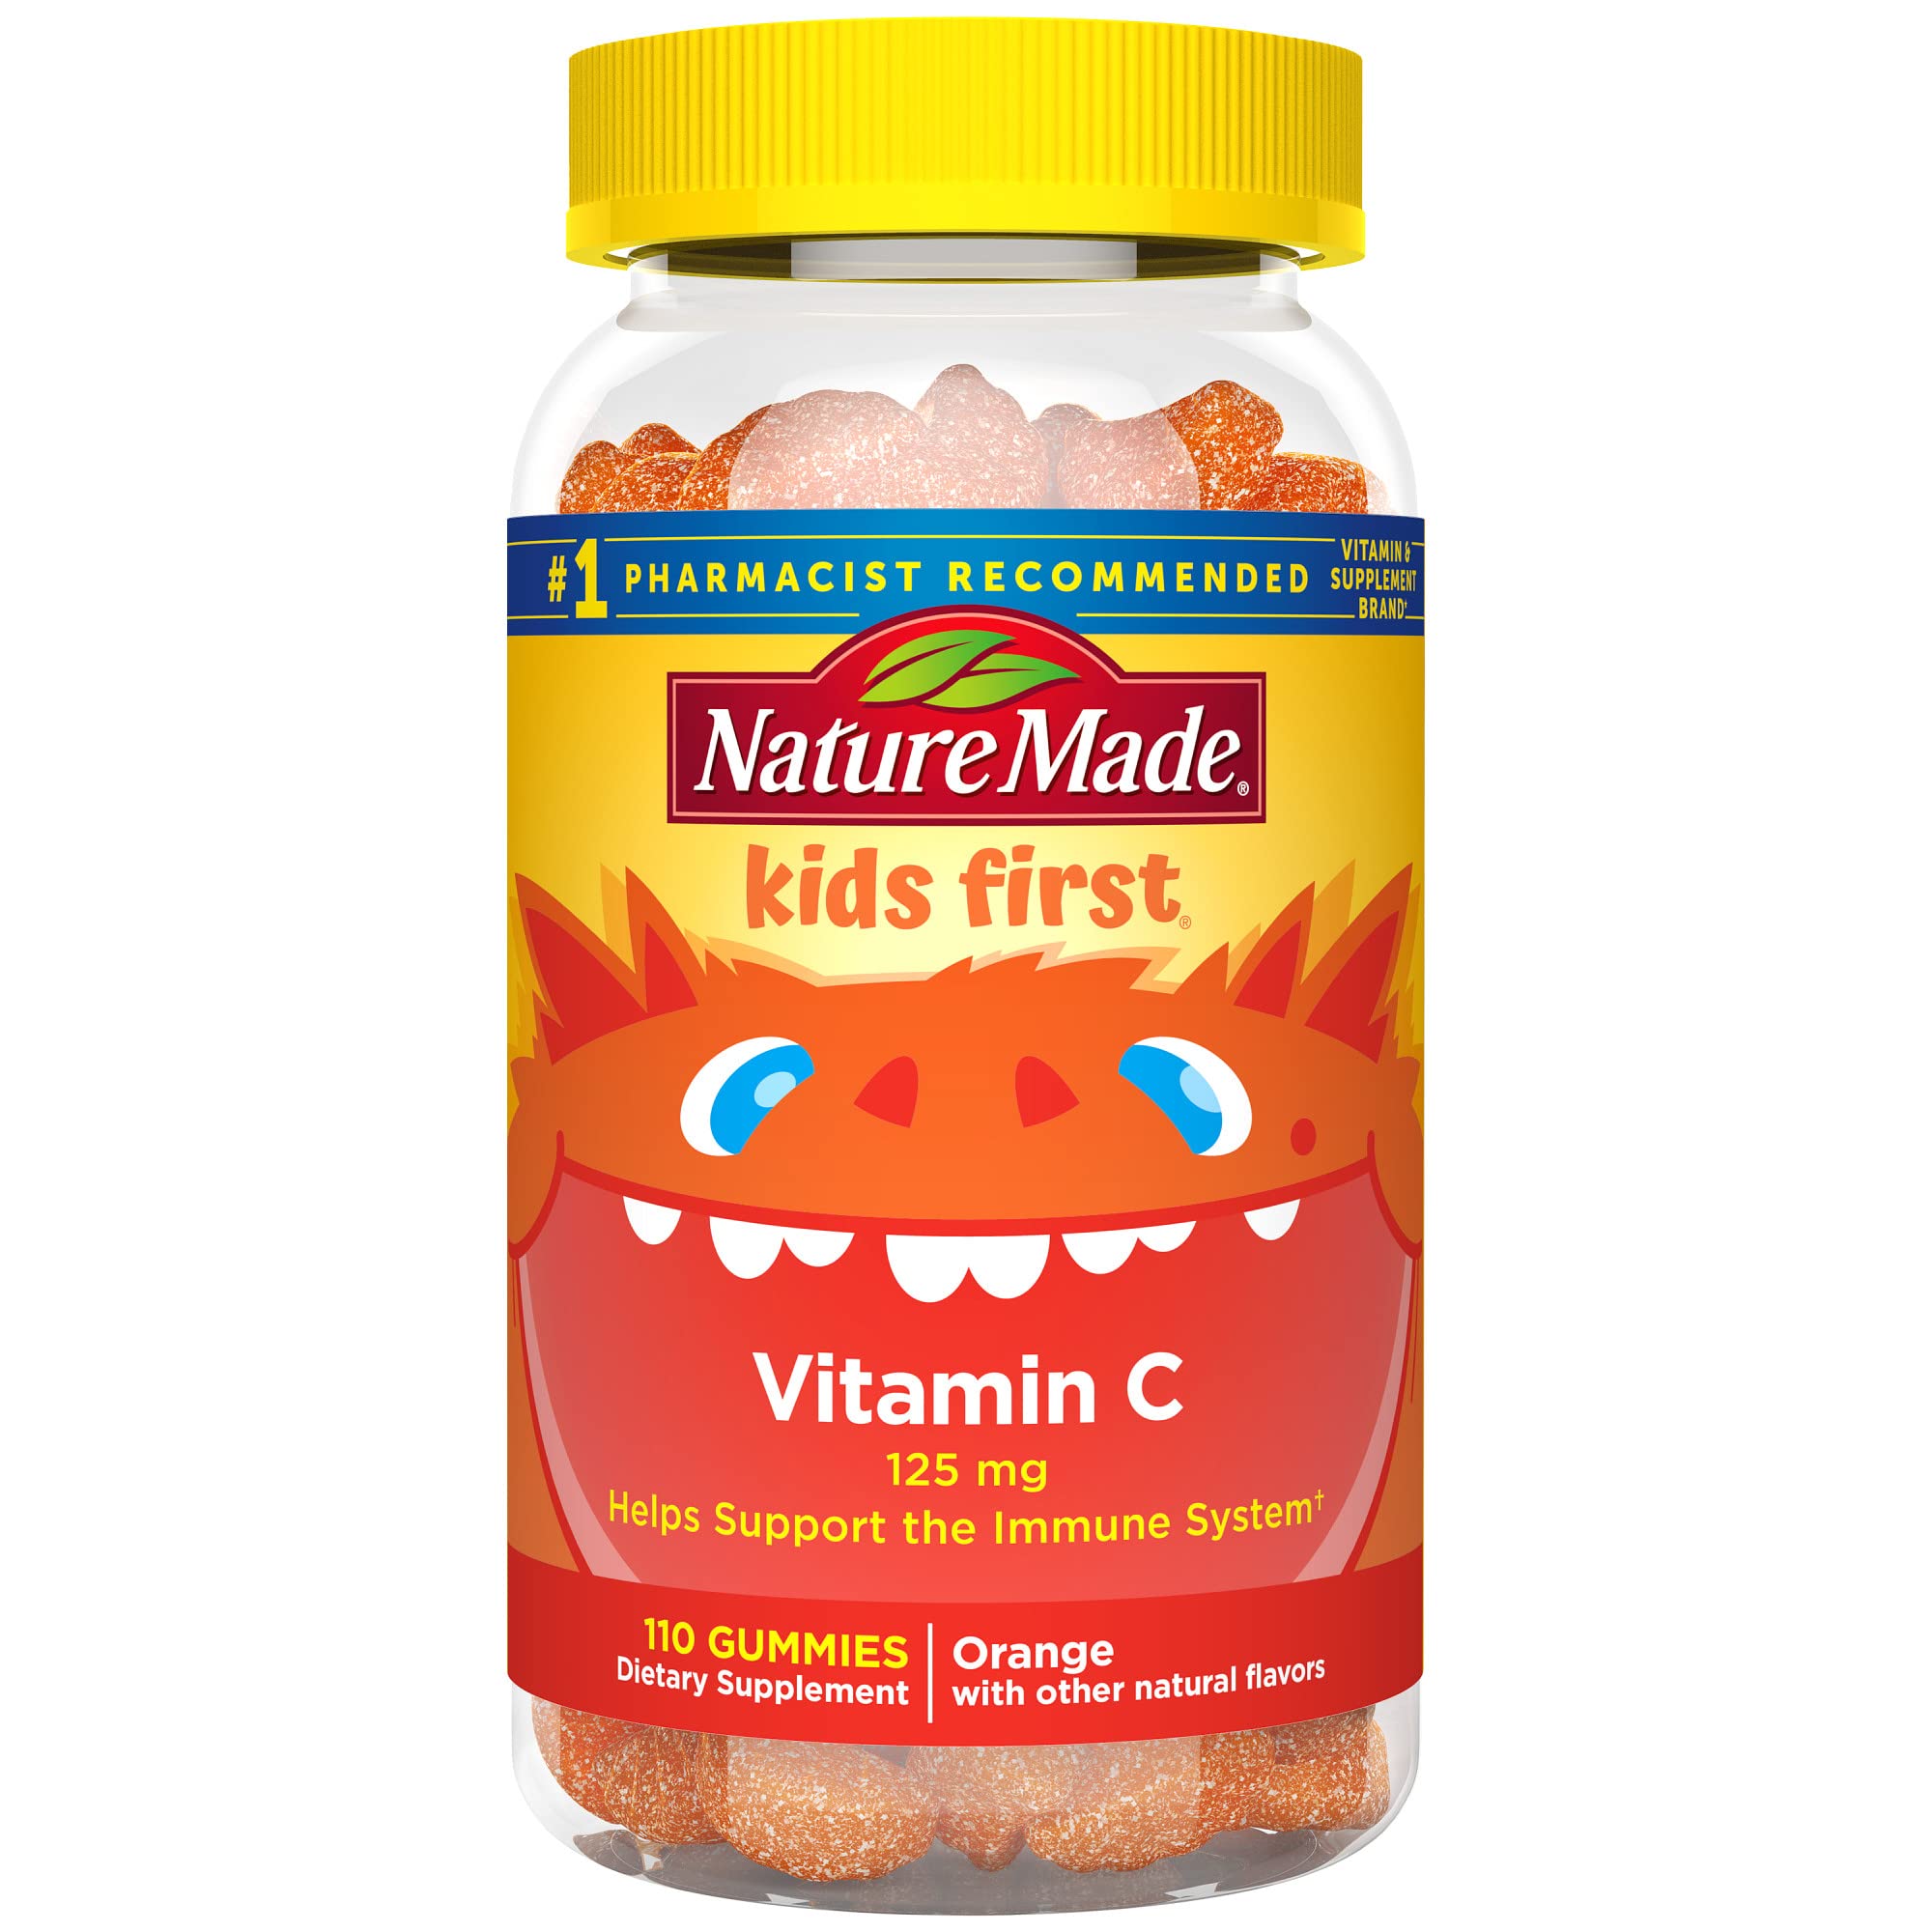 110-Count Nature Made Kids First Vitamin C Gummies $6.37 shipped w/ Prime